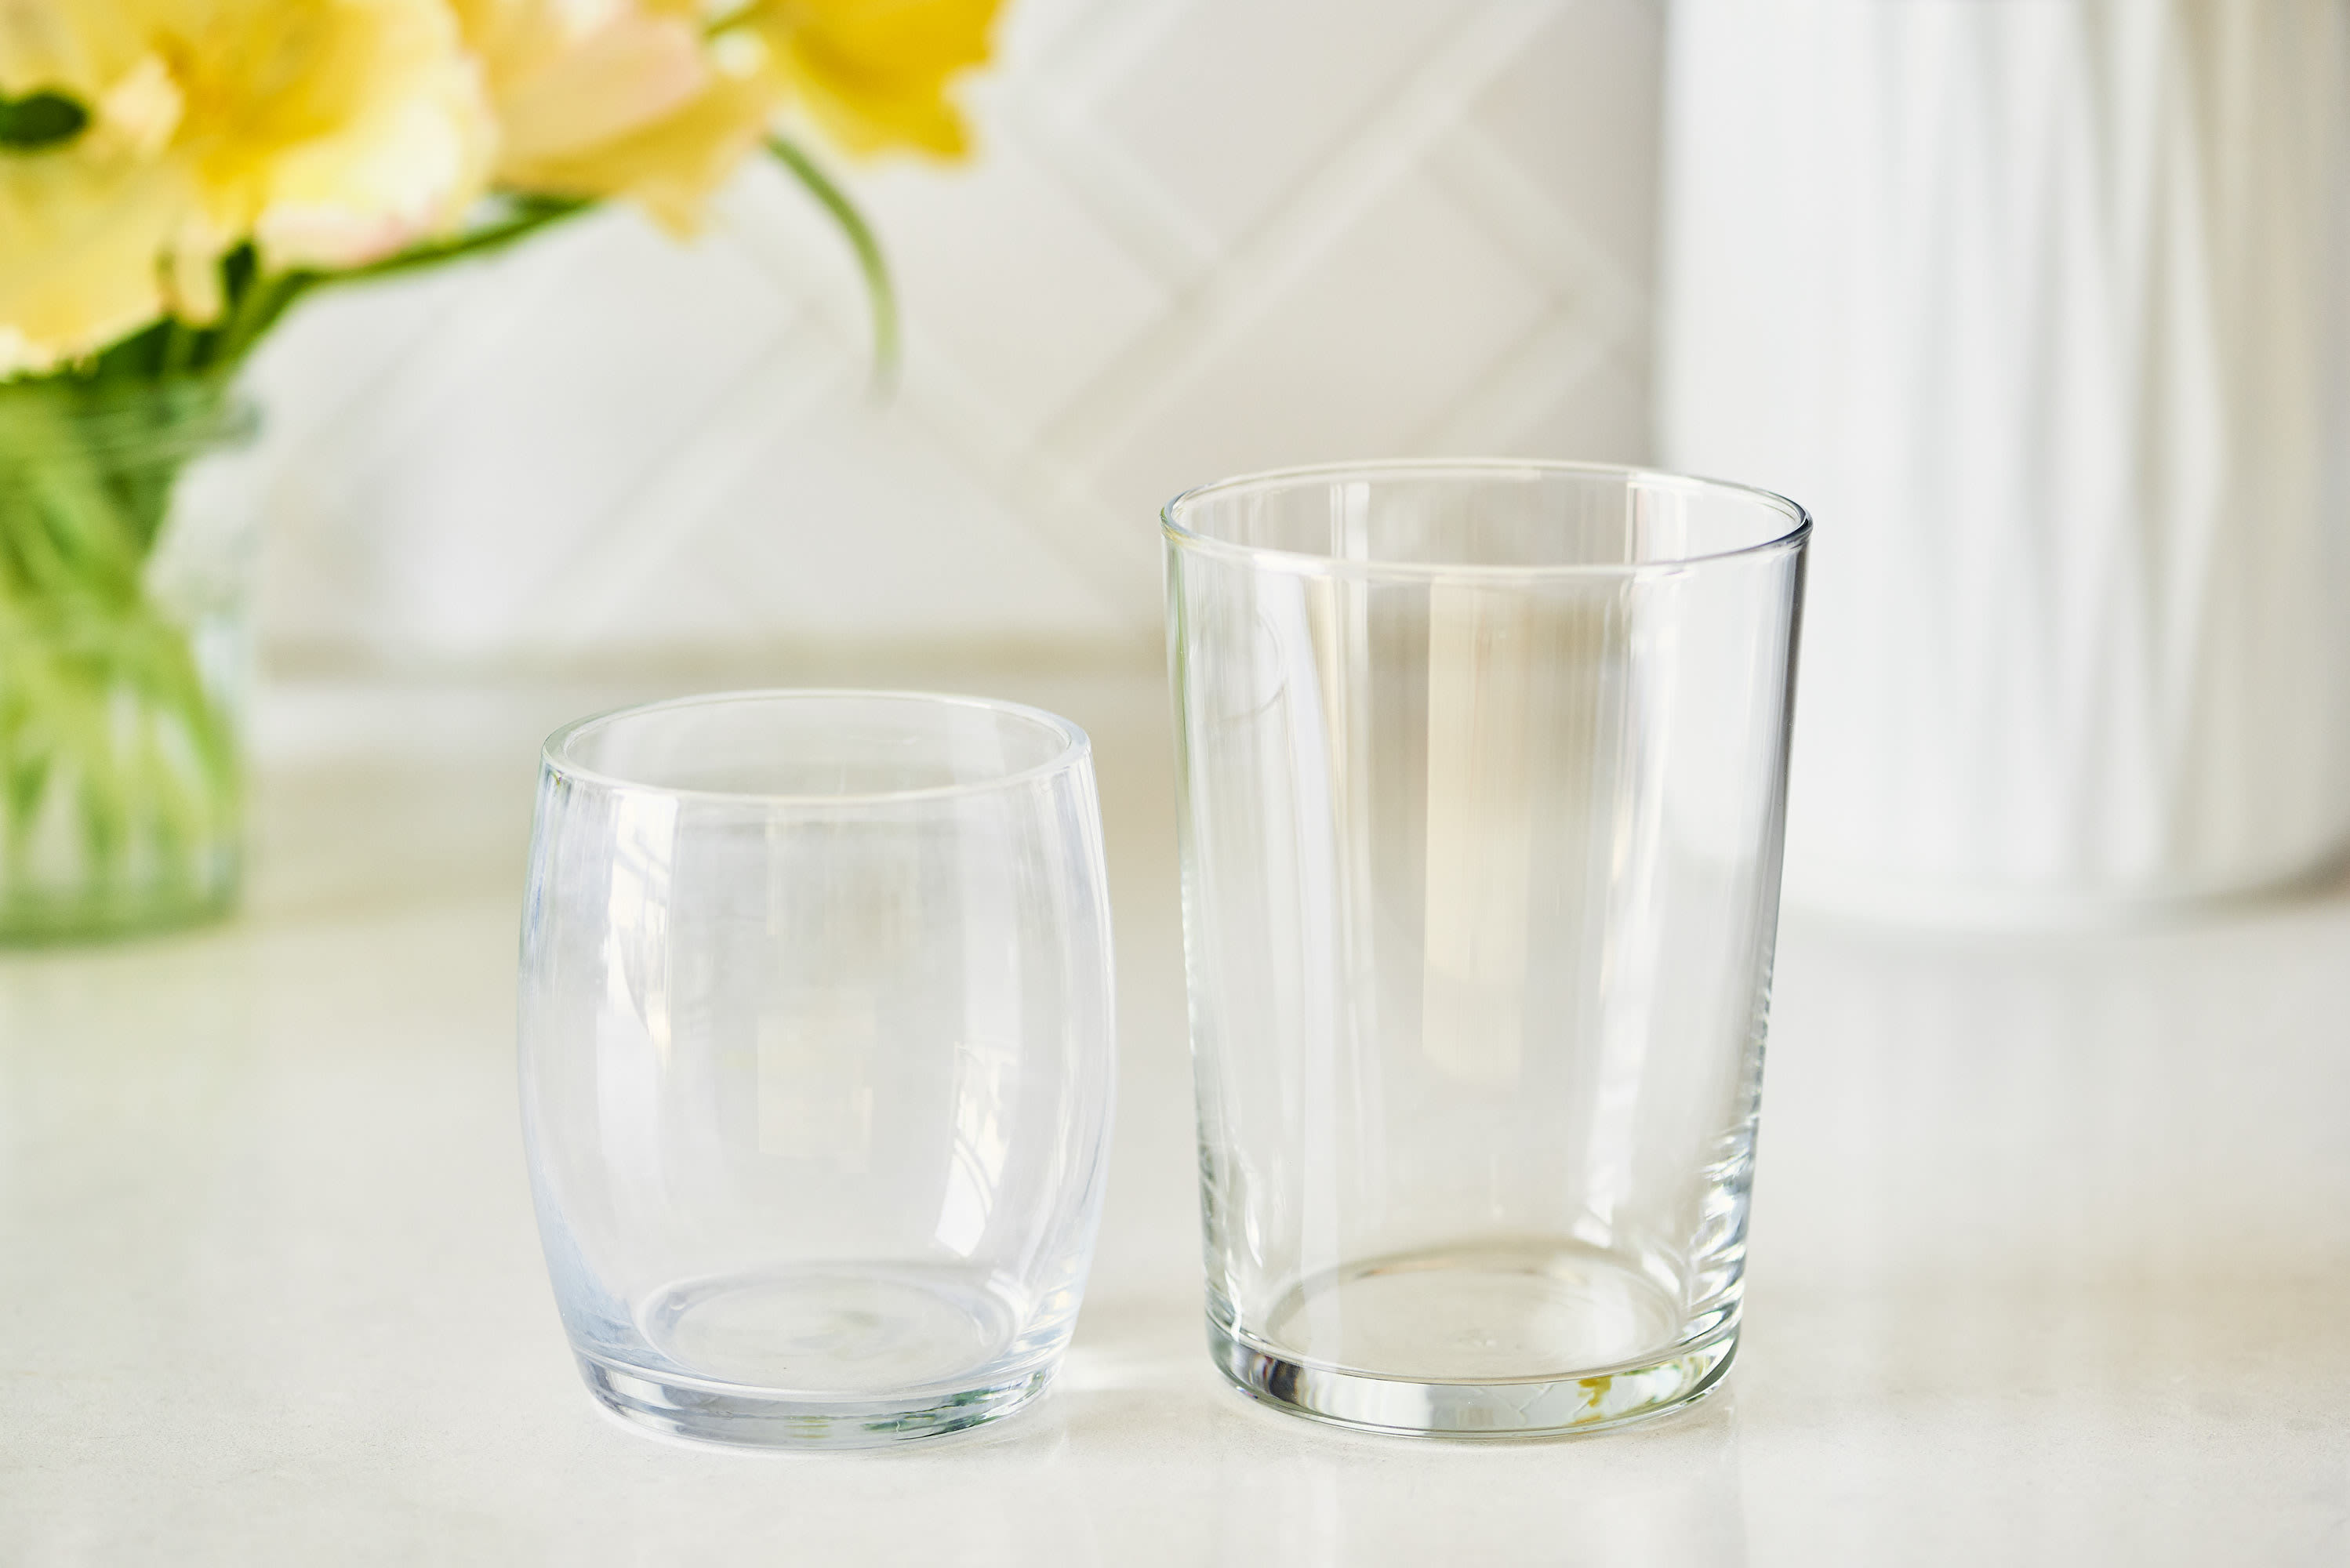 What Causes the White Film on Glassware?